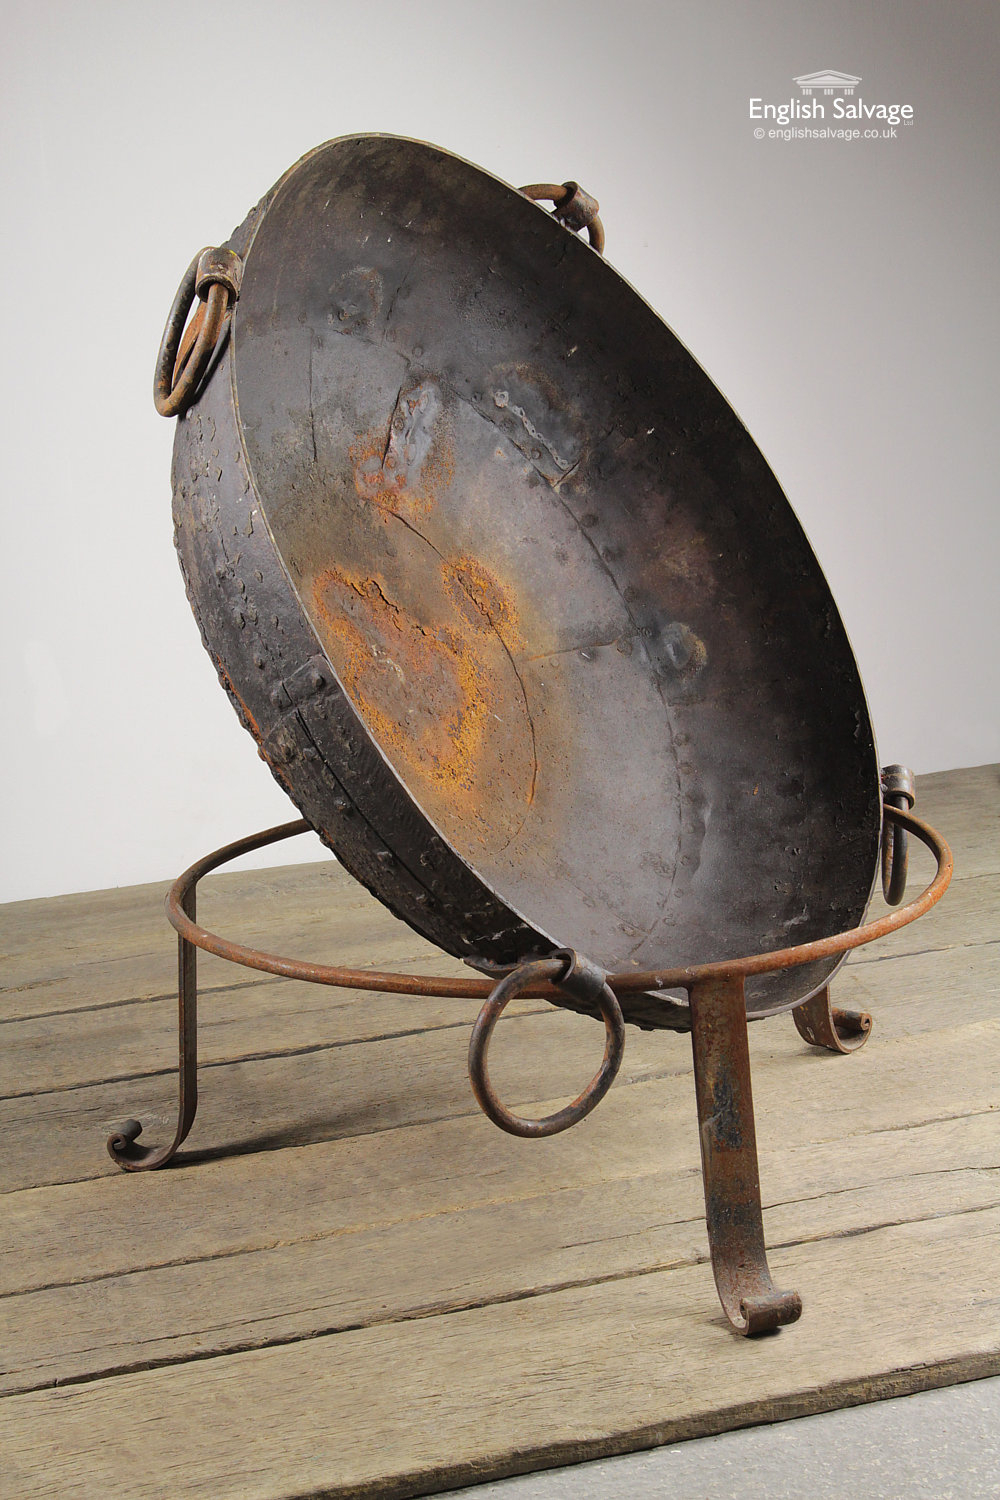 Large Riveted Fire Pit Kadai On Stand, Fire Pit Stand